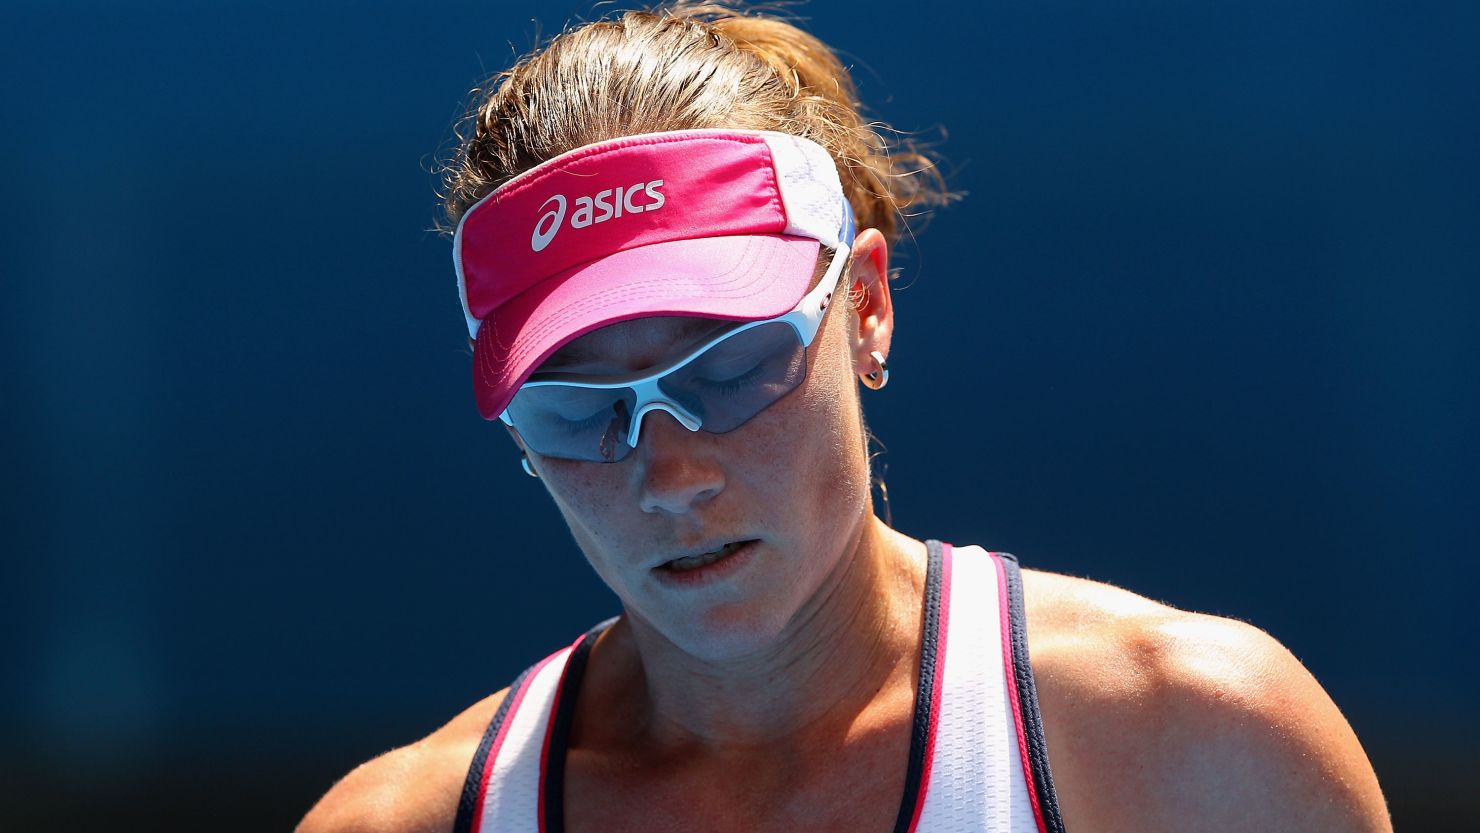 Australia's Samantha Stosur claimed the first grand slam singles title of her career at the 2011 U.S. Open.